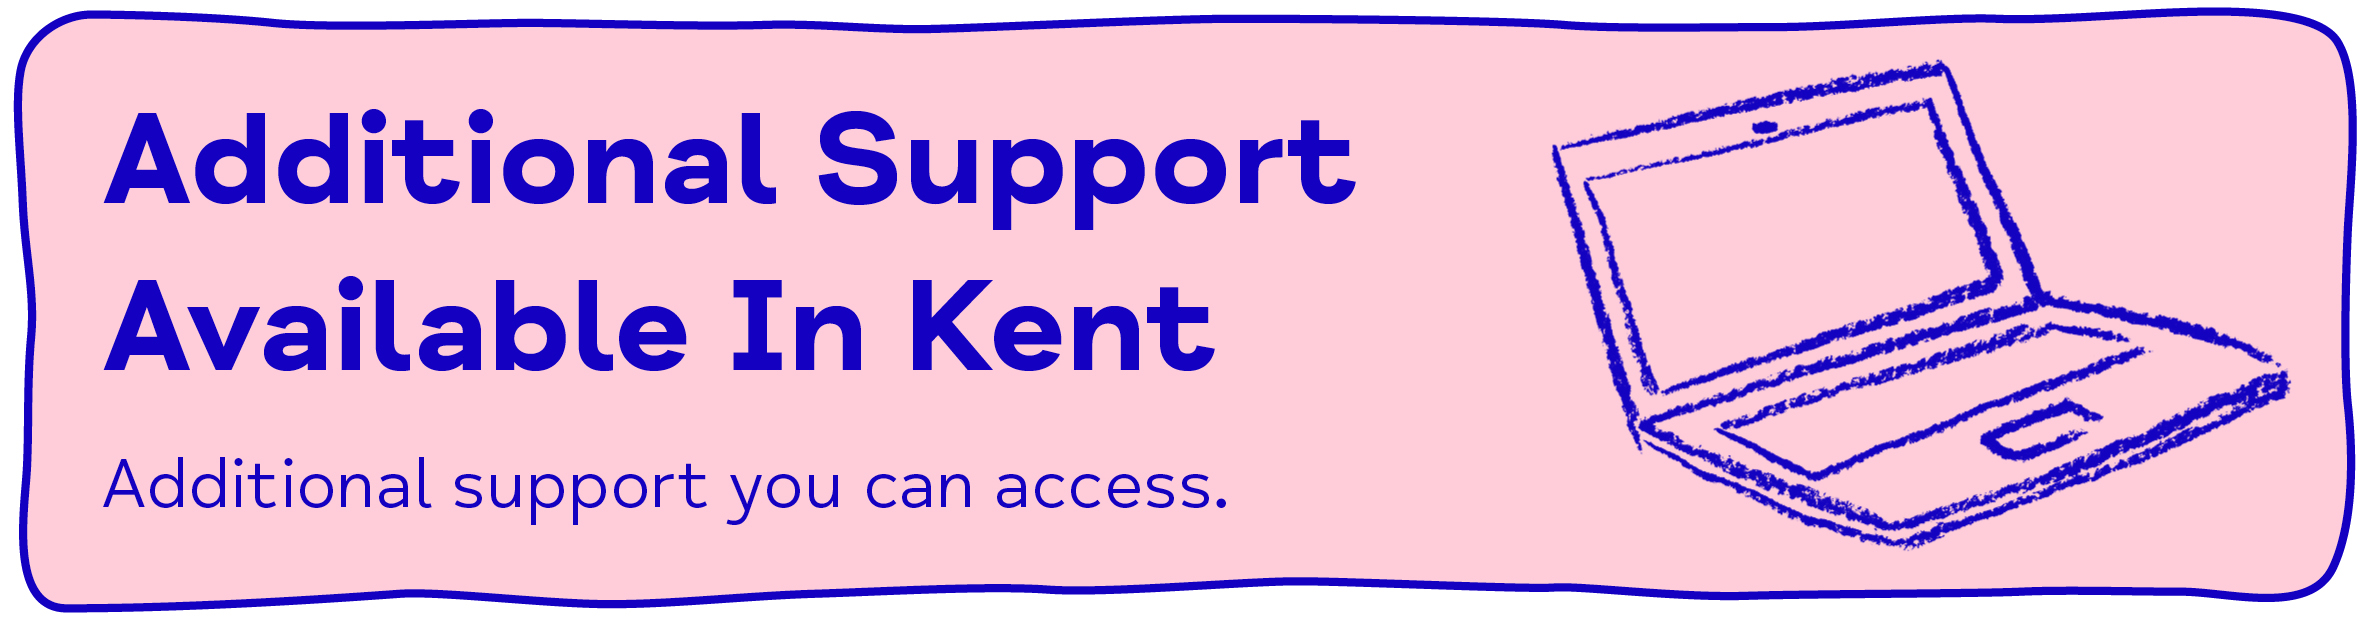 Additional Support Available In Kent. Additional support you can access.